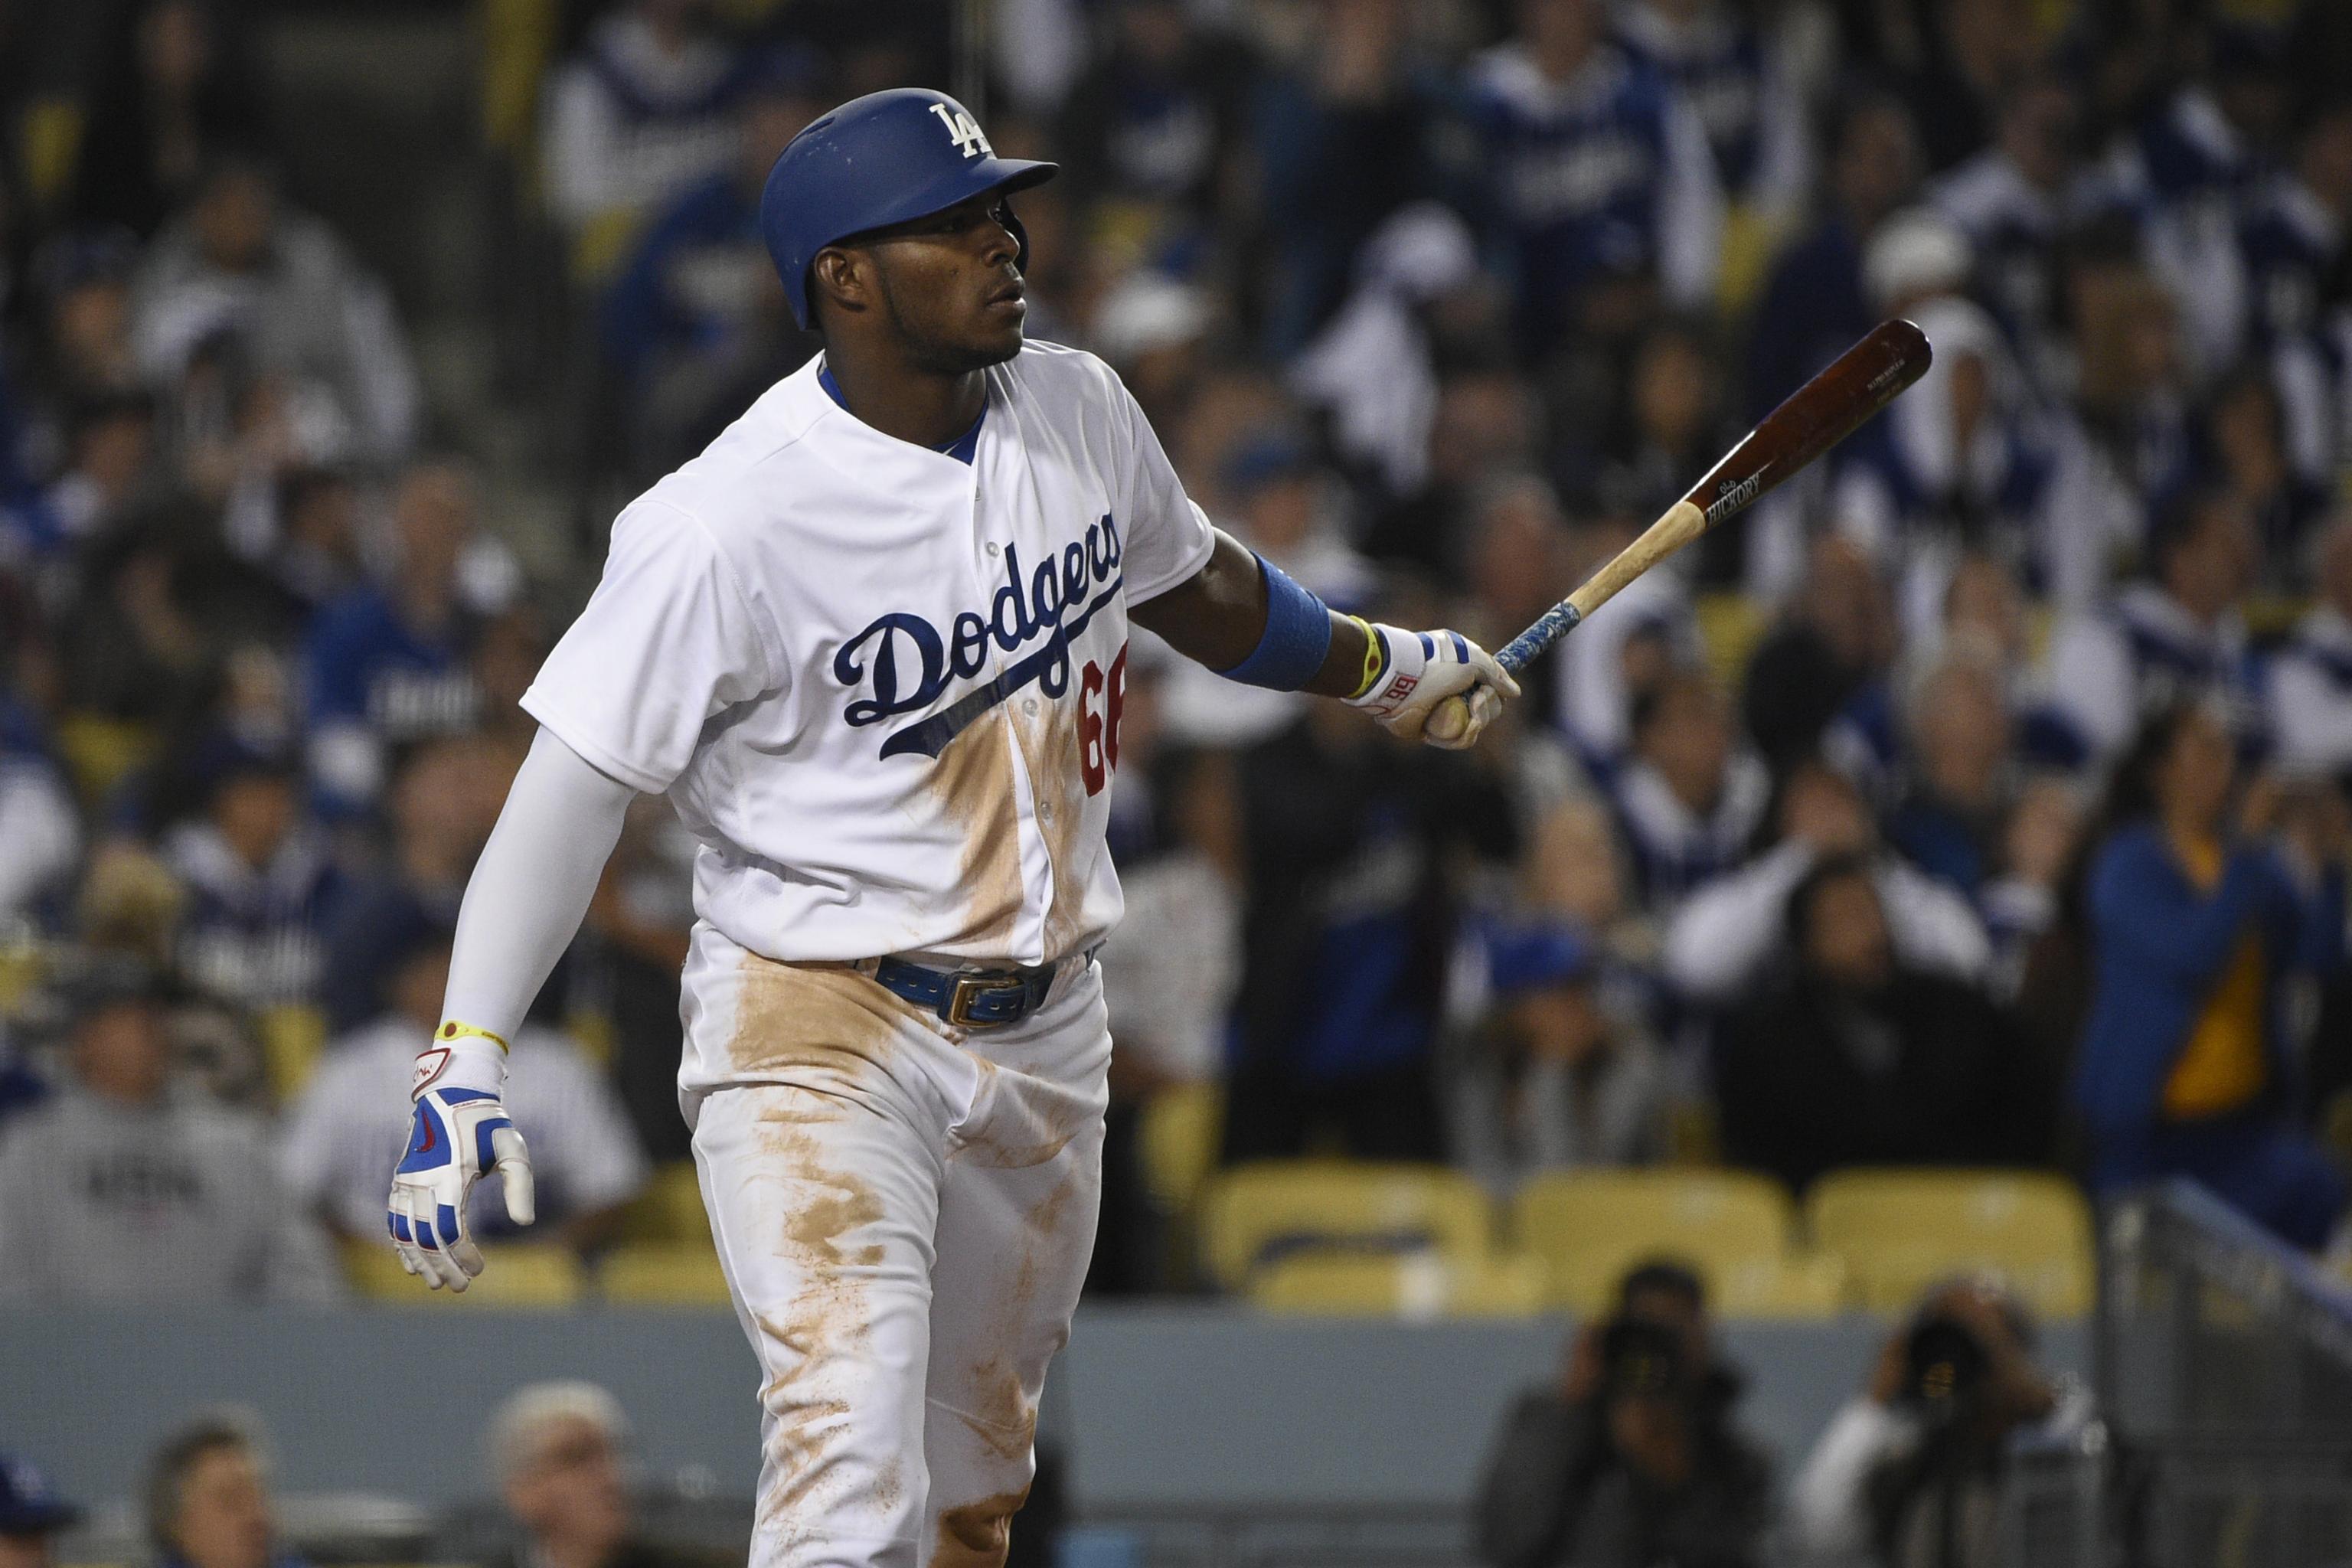 Early Signs Signal Yasiel Puig Is Headed for the Year We've Been